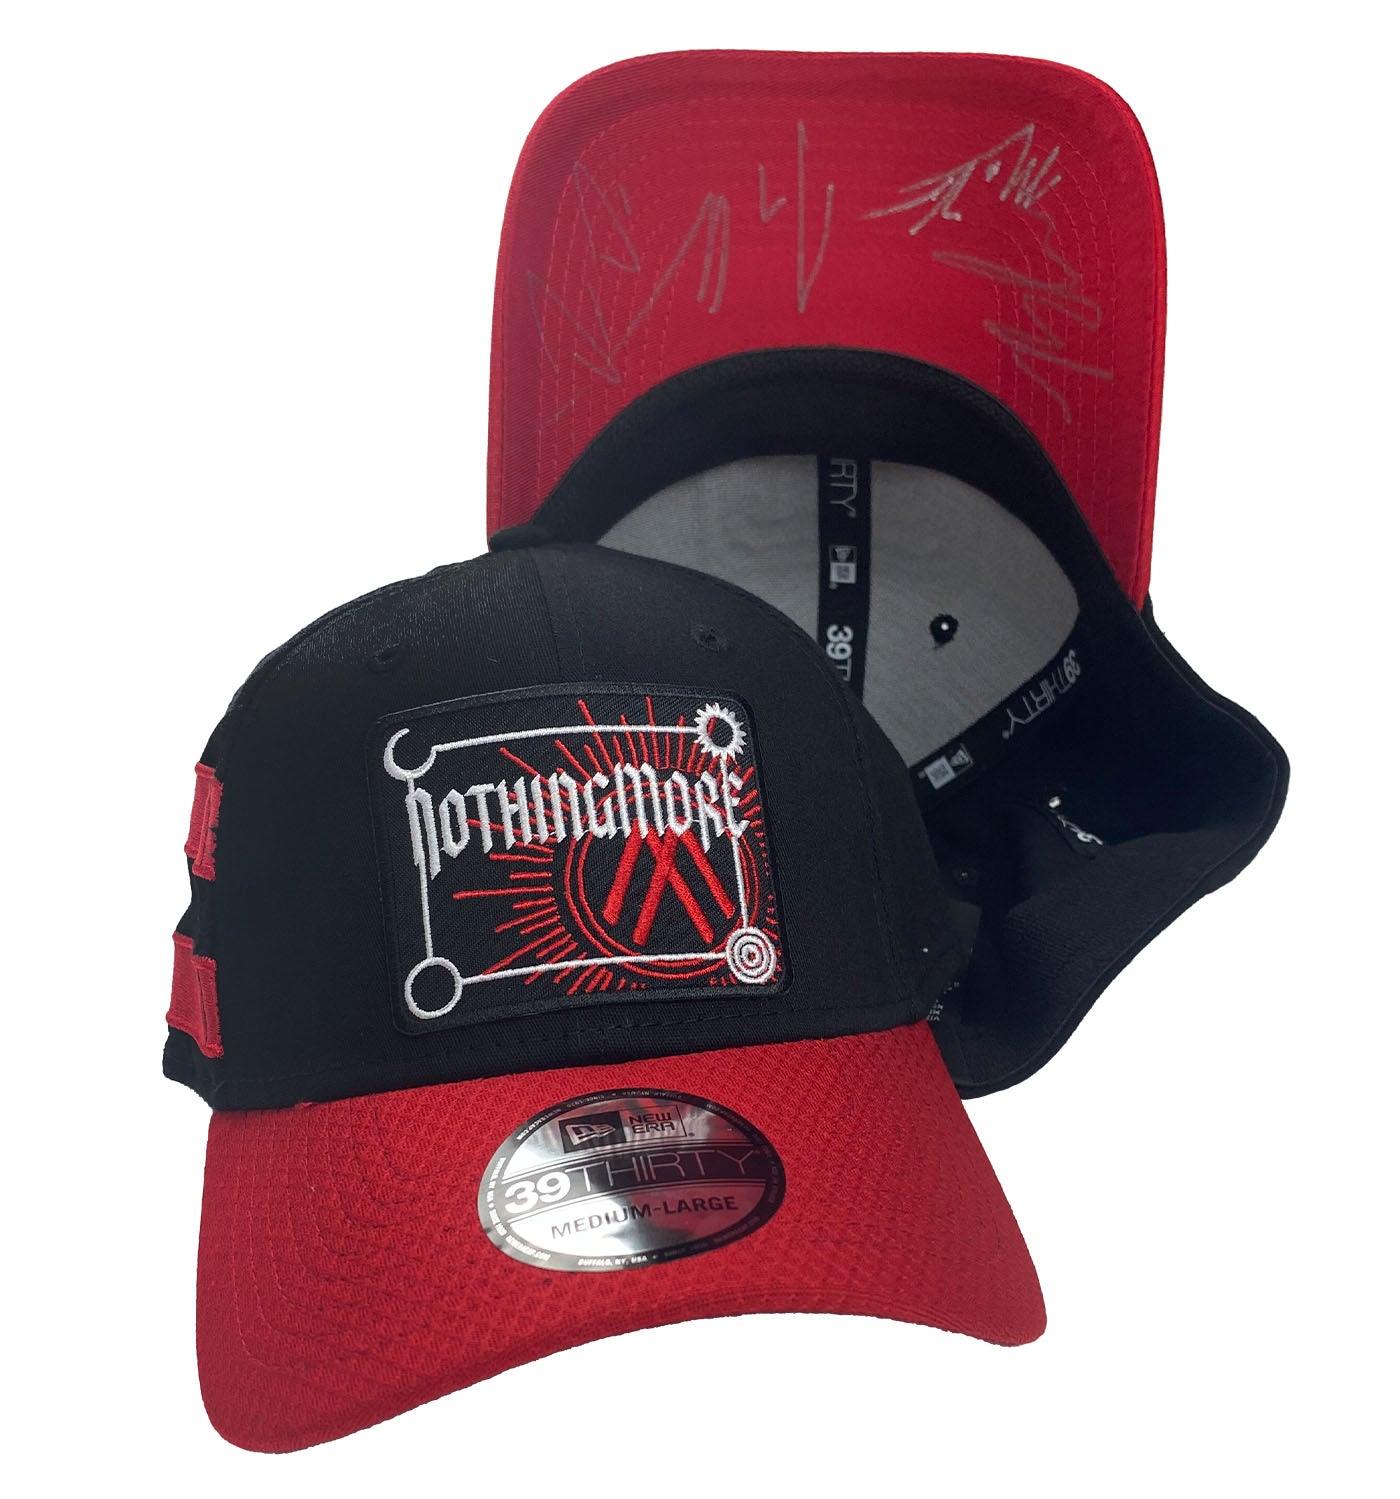 NOTHING MORE 'NEVERLAND' limited edition, autographed stretch fit hockey cap in black with red brim and red stripes